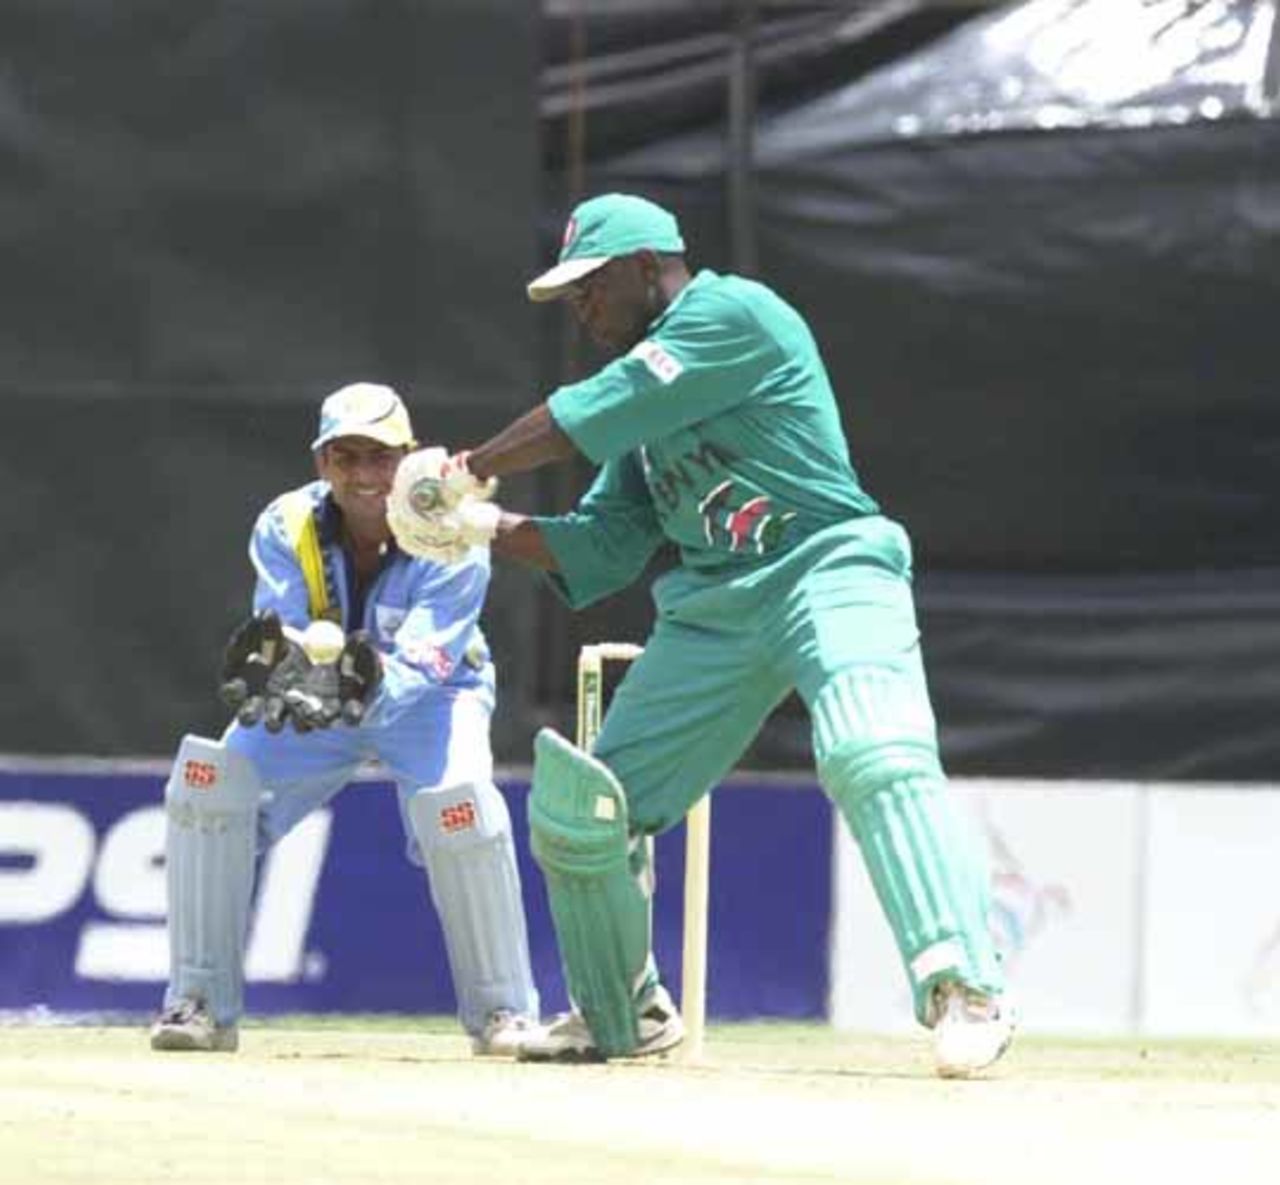 3 Oct 2000: Maurice Odumbe cuts a ball, watched by Vijay Dahiya  during Kenya's ICC KnockOut match against India at Gymkhana Club Ground, Nairobi